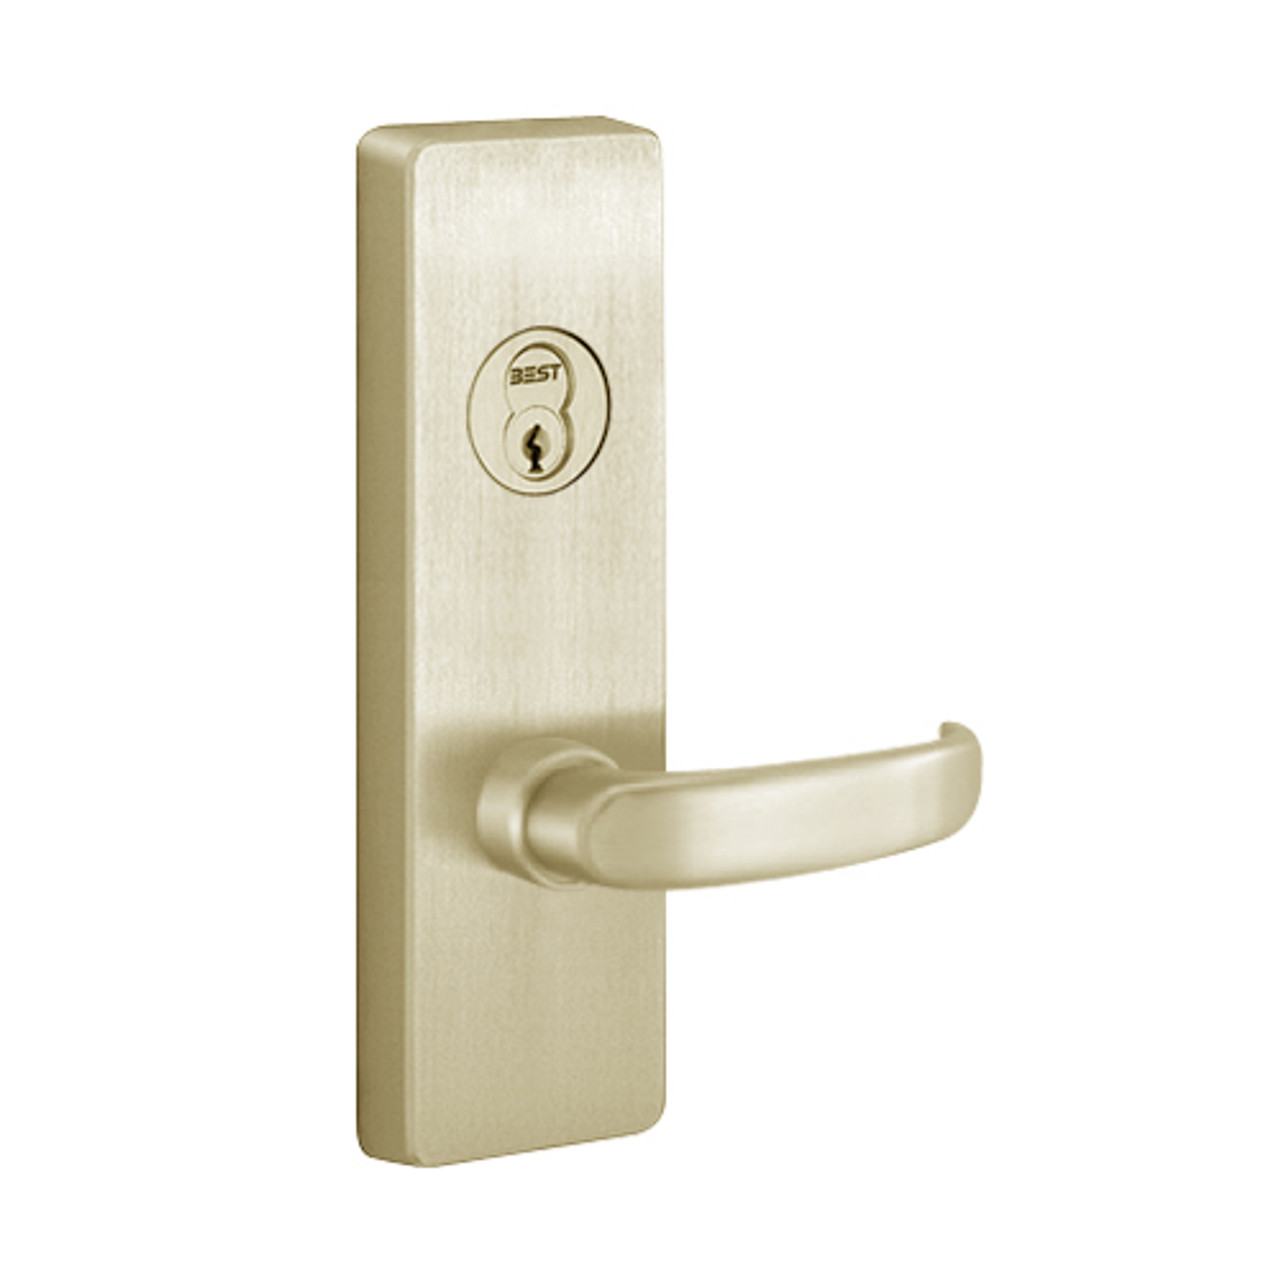 M4903D-606-LHR PHI Key Retracts Latchbolt Trim with D Lever Design for Apex and Olympian Series Exit Device in Satin Brass